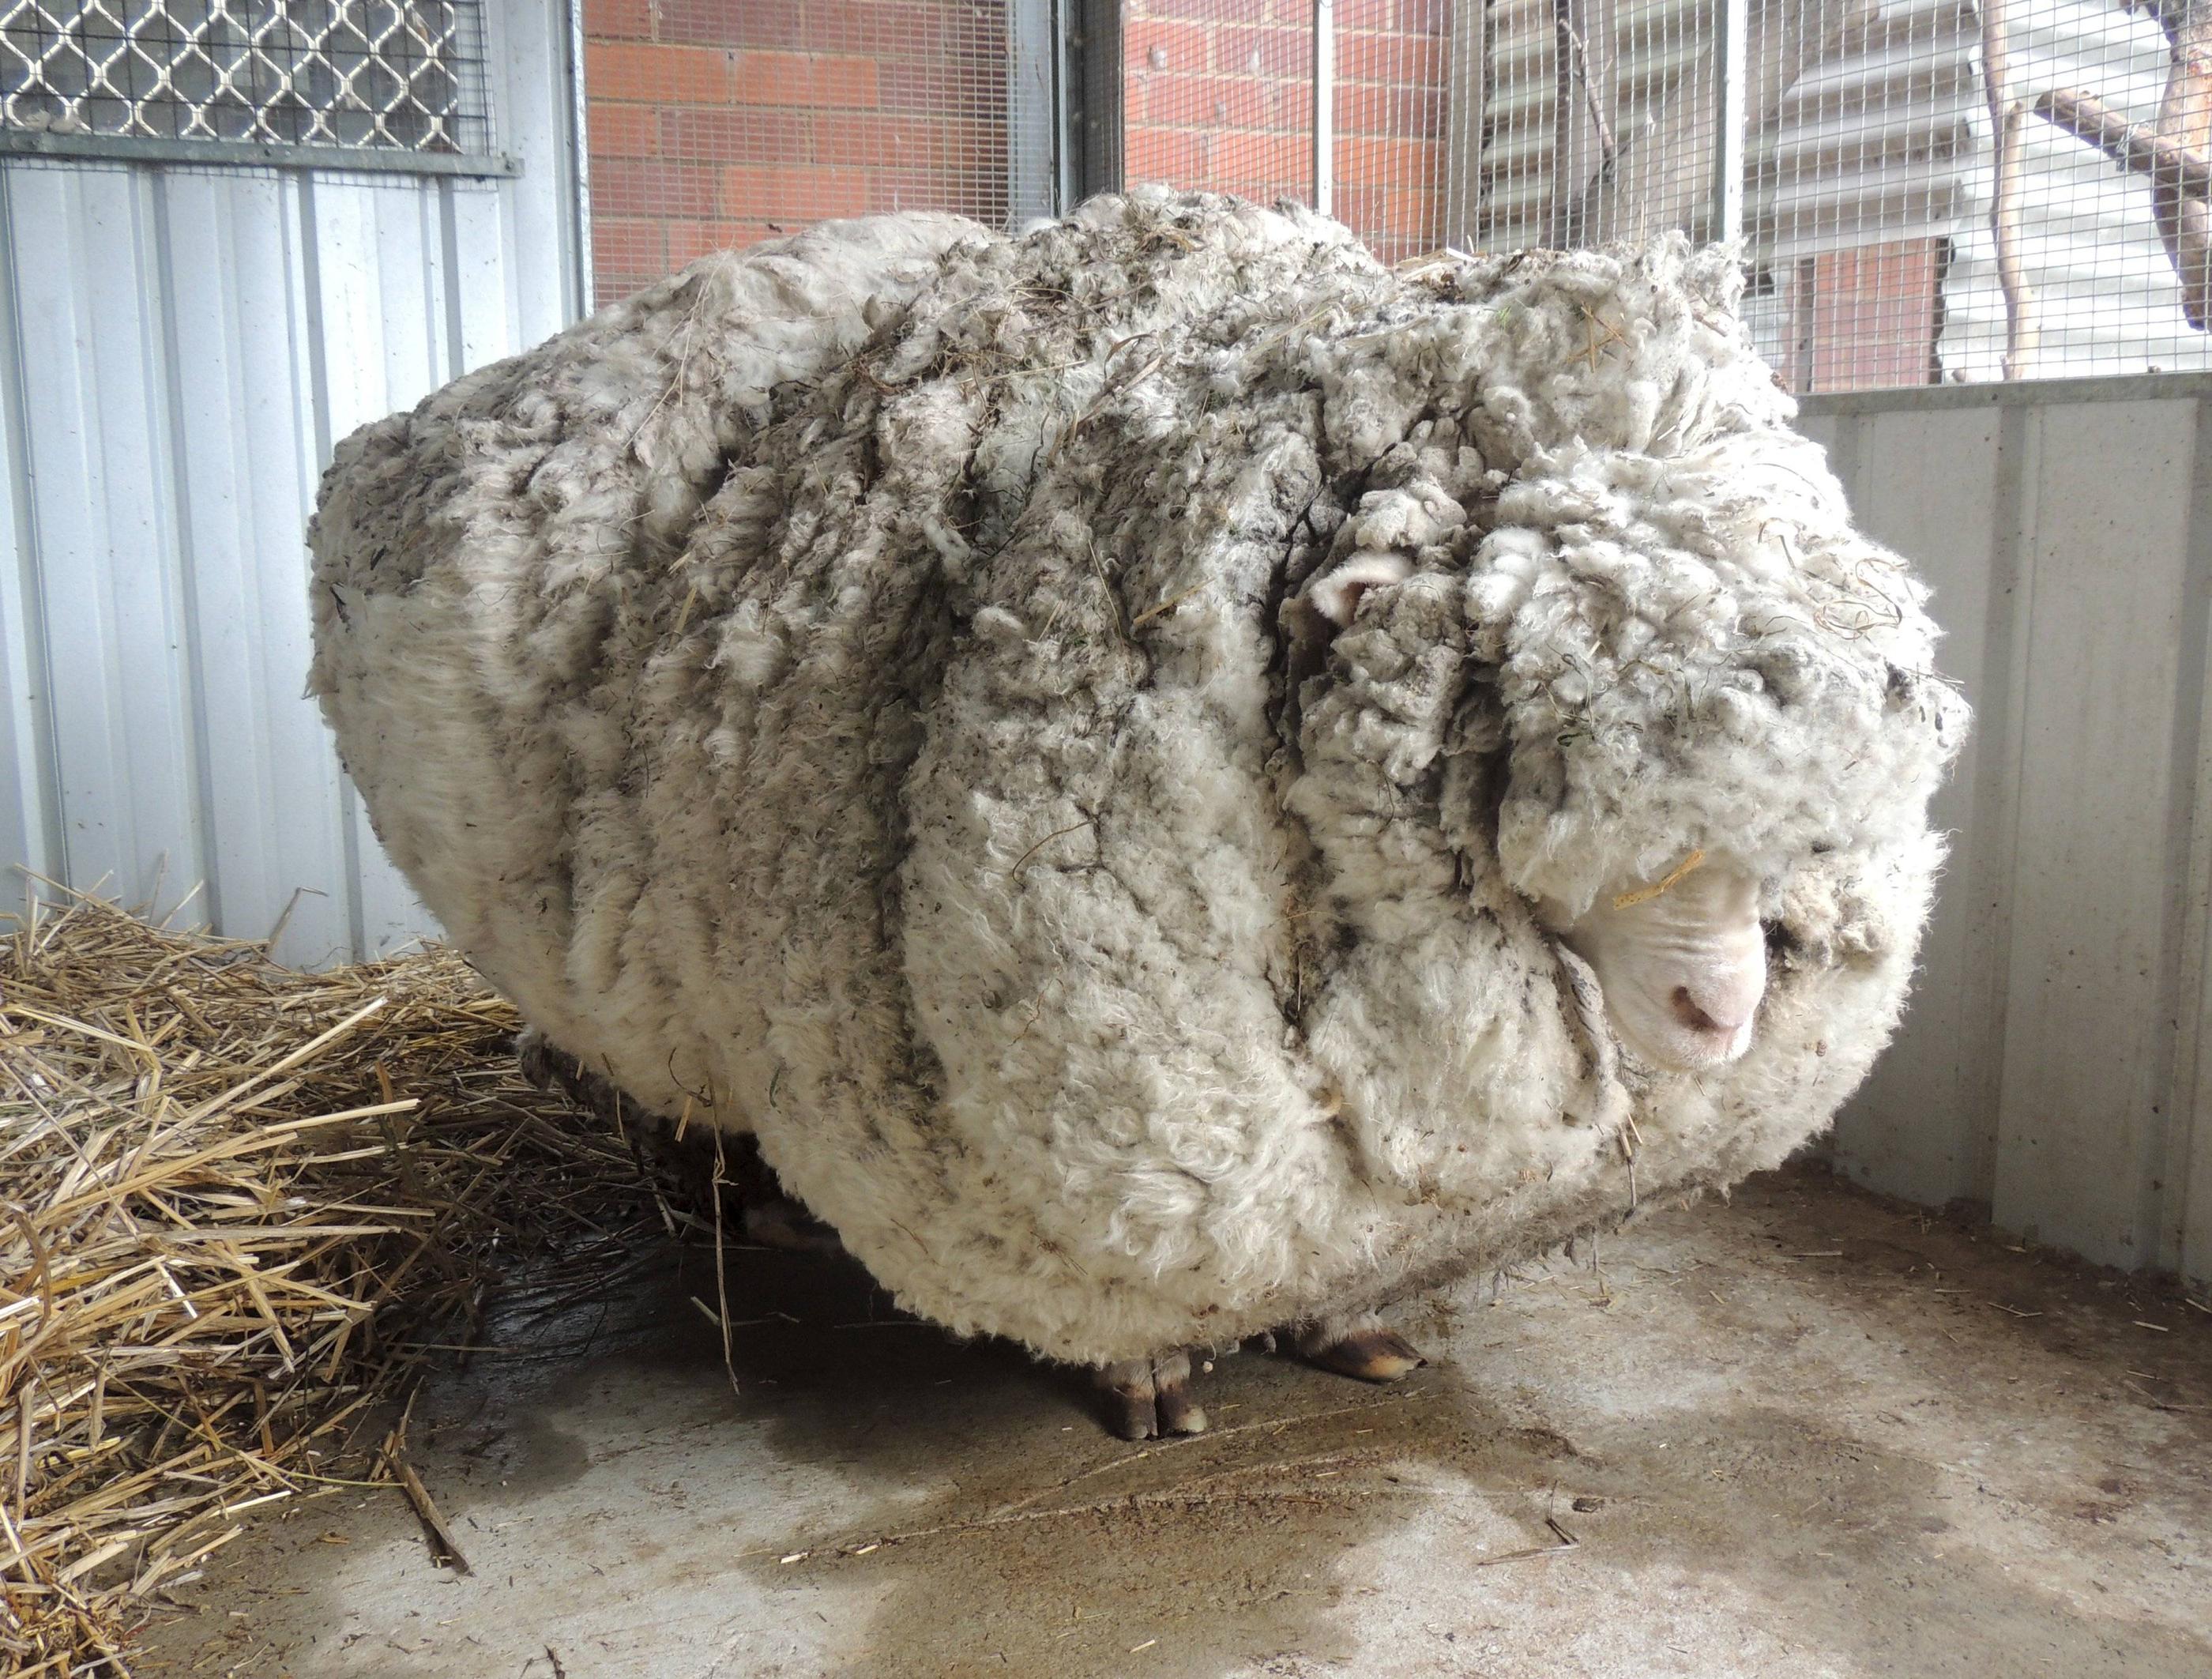 Chris the sheep who set a world record for ‘most fleece sheared from a sheep’ after he was found wandering in the wild